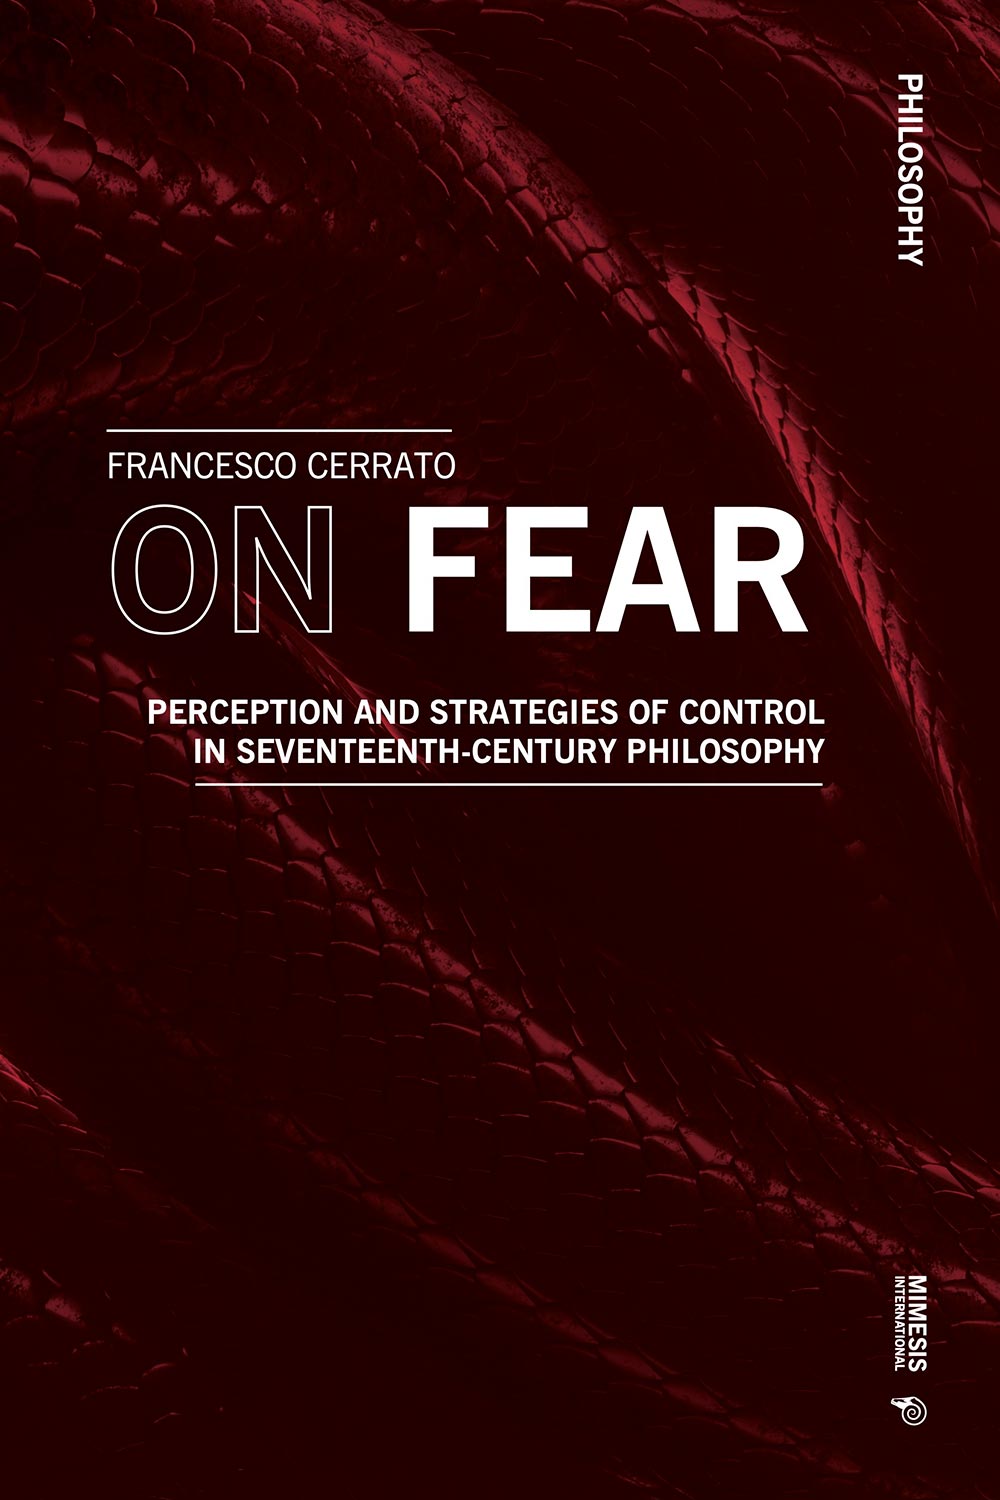 On Fear. Perception and Strategies of Control in Seventeenth-century Philosophy